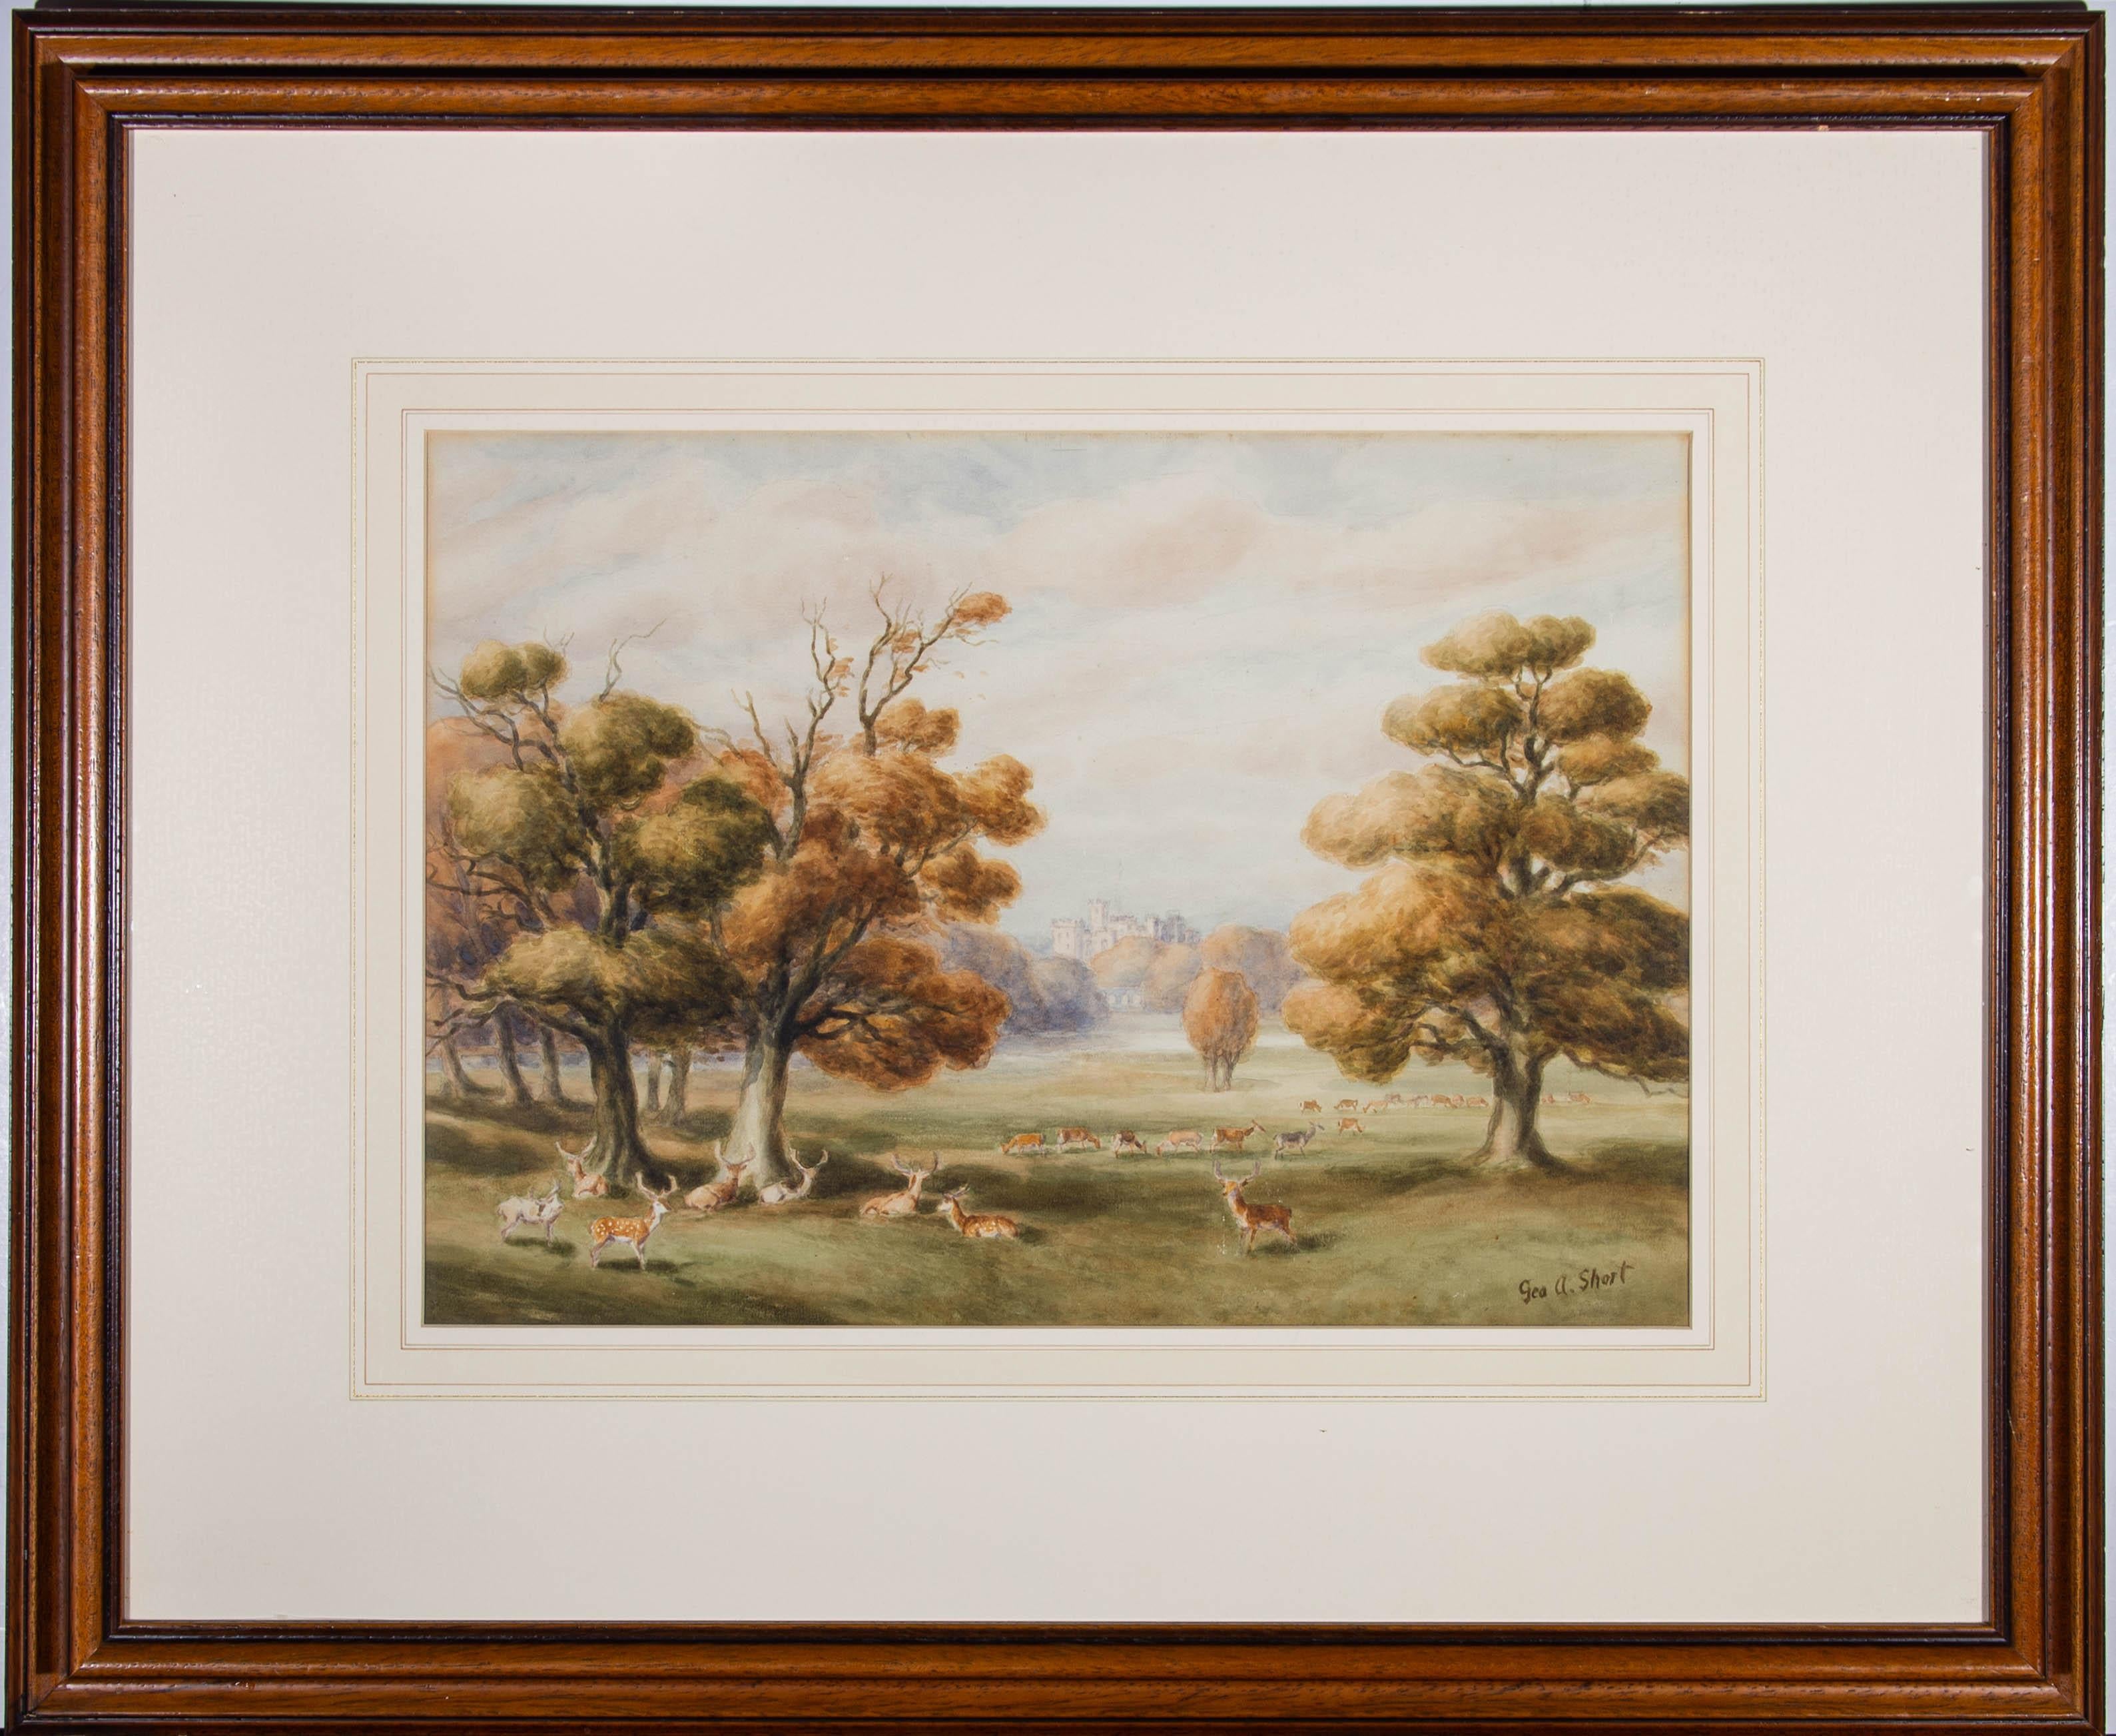 A fine parkland view of the grounds of Belvoir castle in Rutland. The trees are an Autumnal brown and herds of deer roam the grassy meadows. The artist has signed to the lower right and the drawing has been presented in a substantial wood frame with